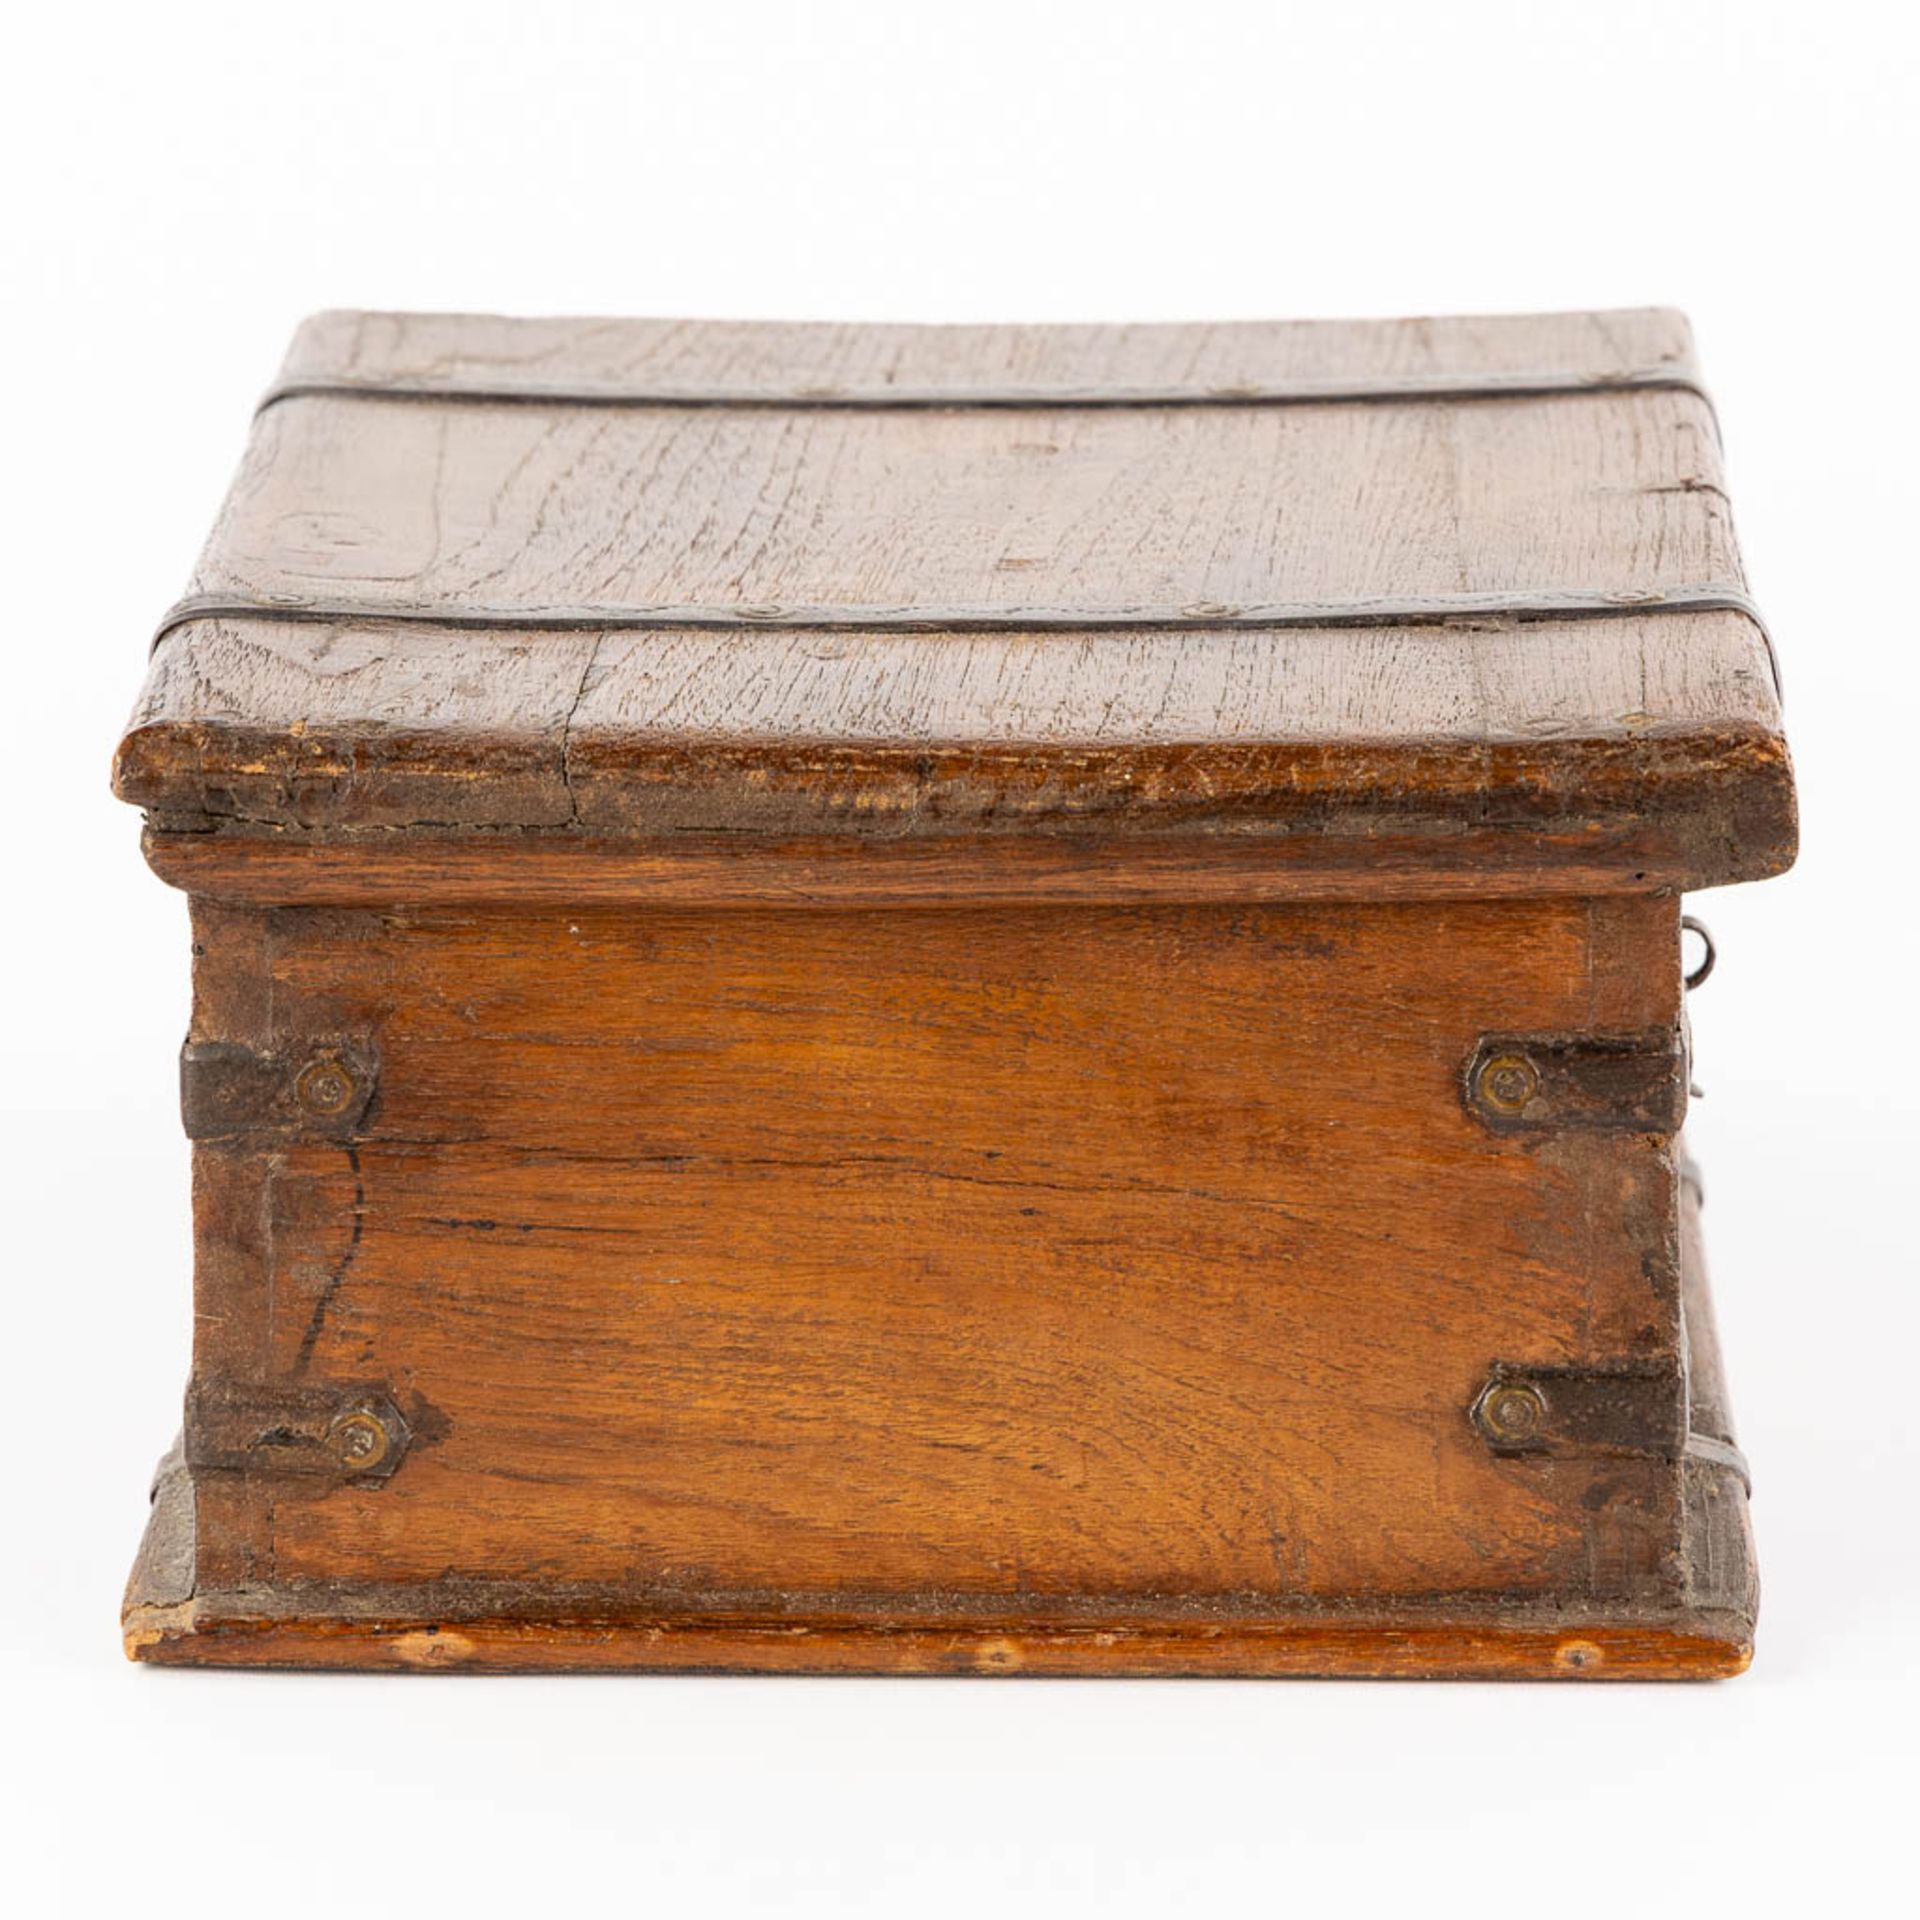 An antique money box or storage chest, oak and wrought iron, 19th C. (L:23 x W:31 x H:13 cm) - Image 6 of 13